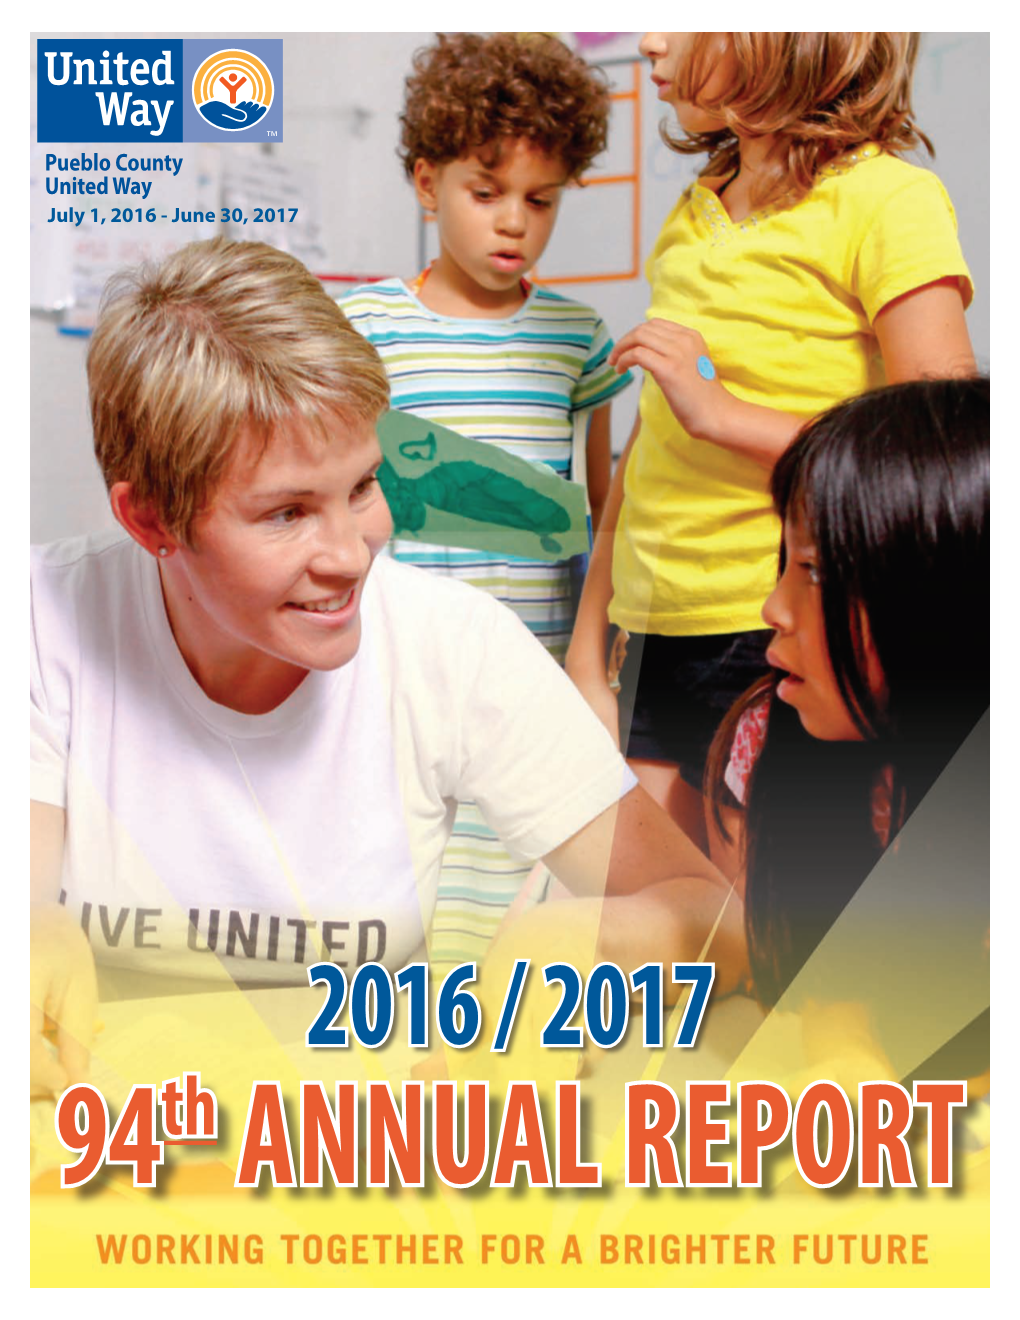 2016/2017 Annual Report Pueblo City/County Health Department, Nonprofits, DSS Published Annually and Other Community Agencies with Heavy Public Traffic